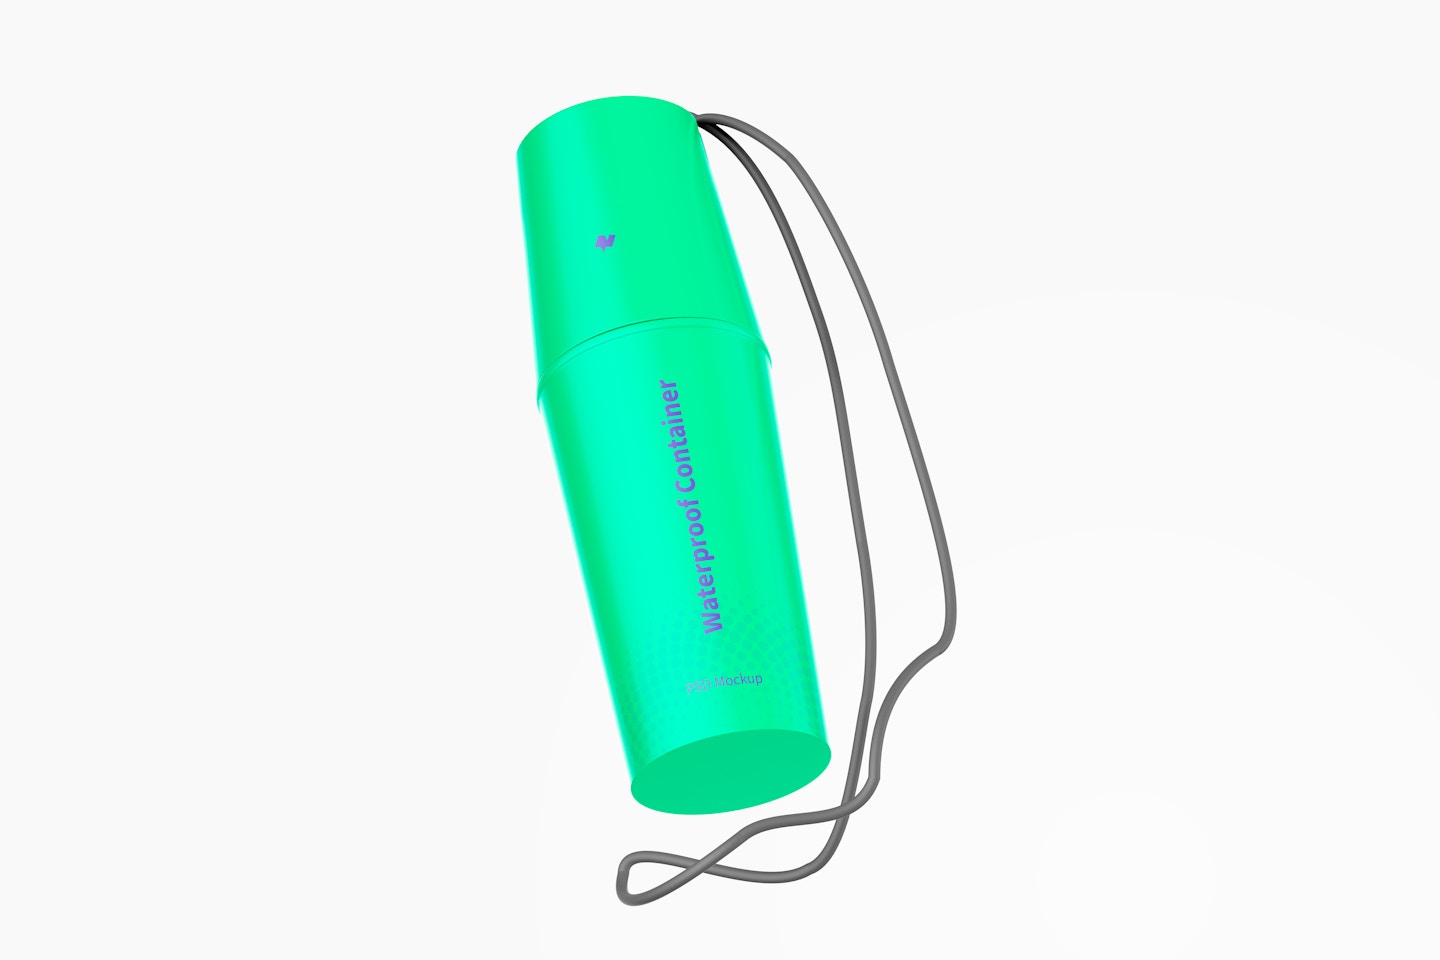 Waterproof Dry Container Bottle Mockup, Floating